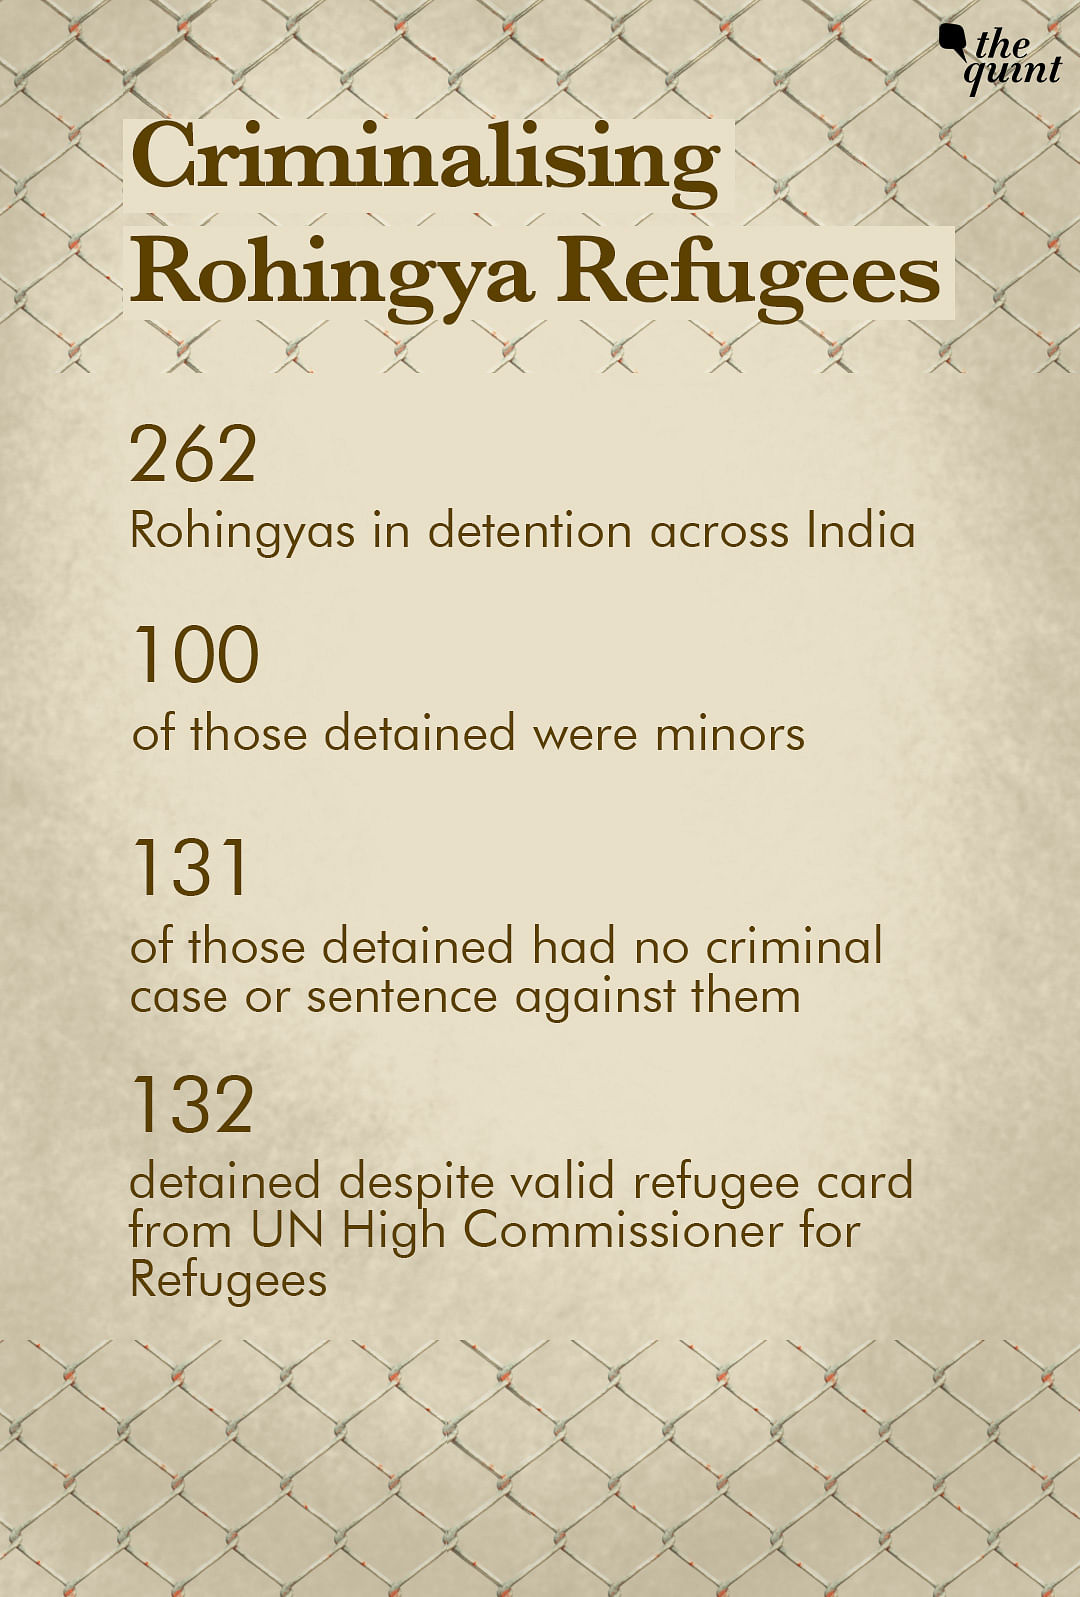 India’s crimmigration policy dehumanises Rohingyas as security threats, subjecting them to detention & deportation.